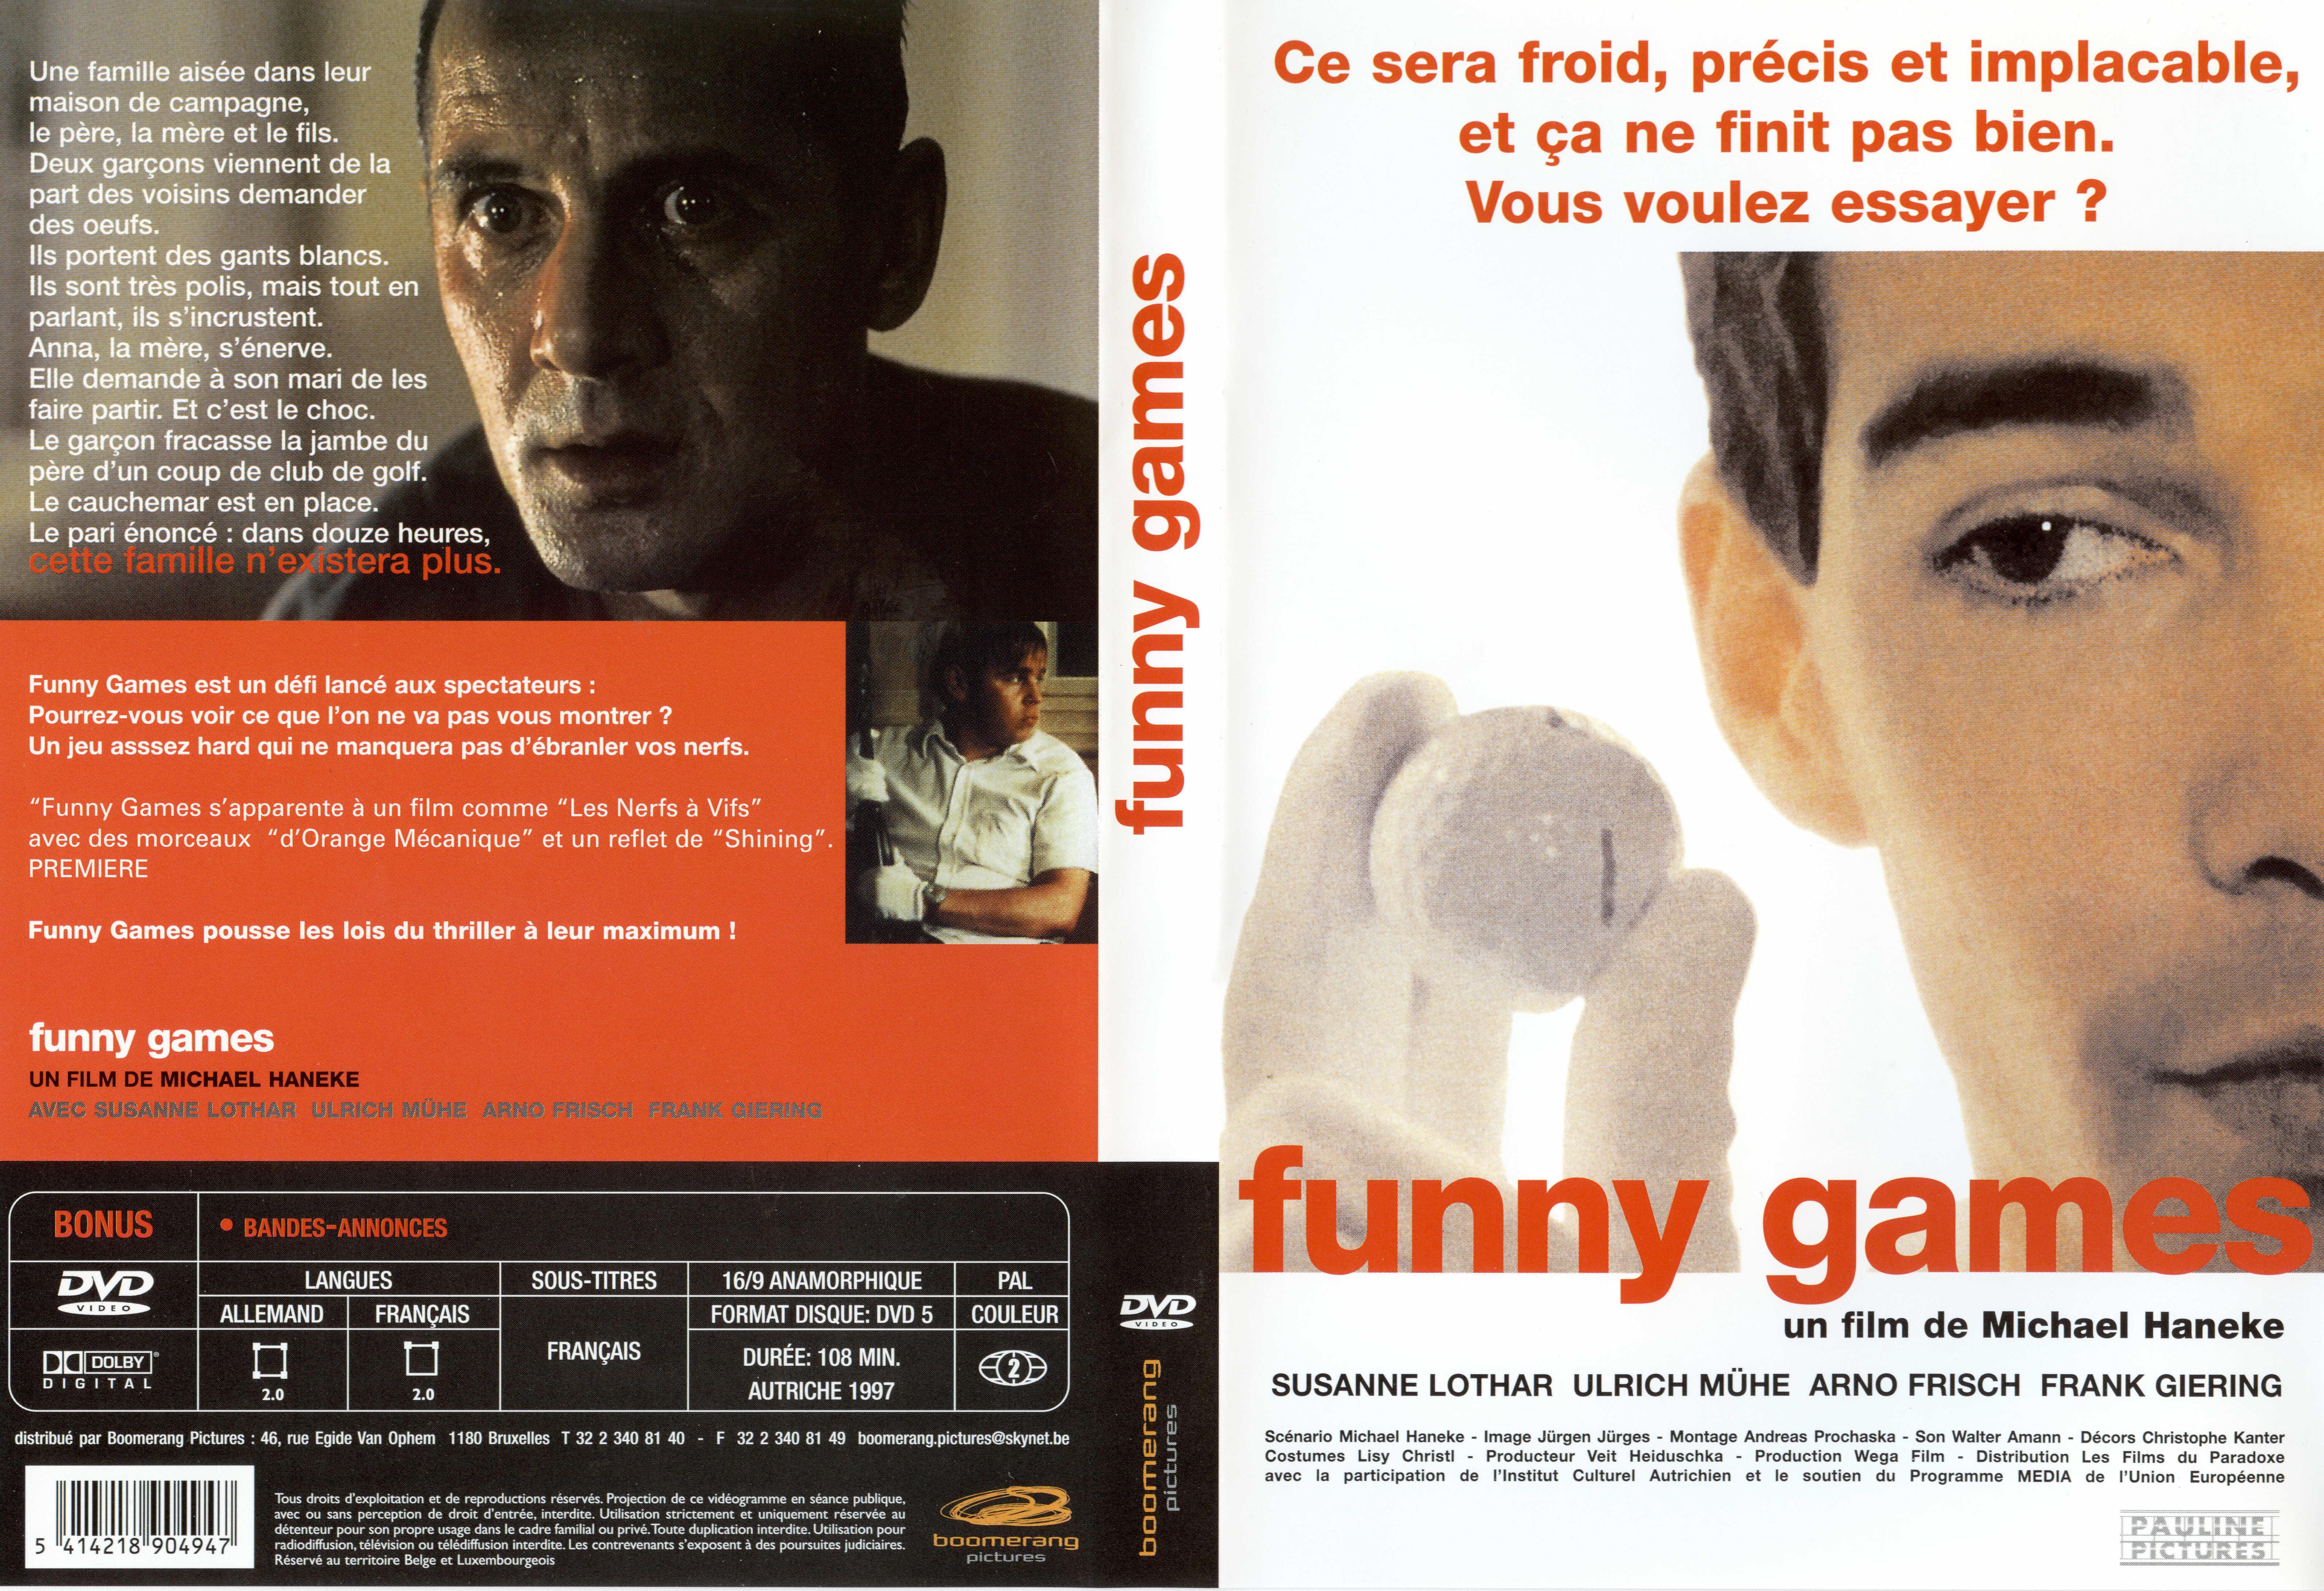 Jaquette DVD Funny games